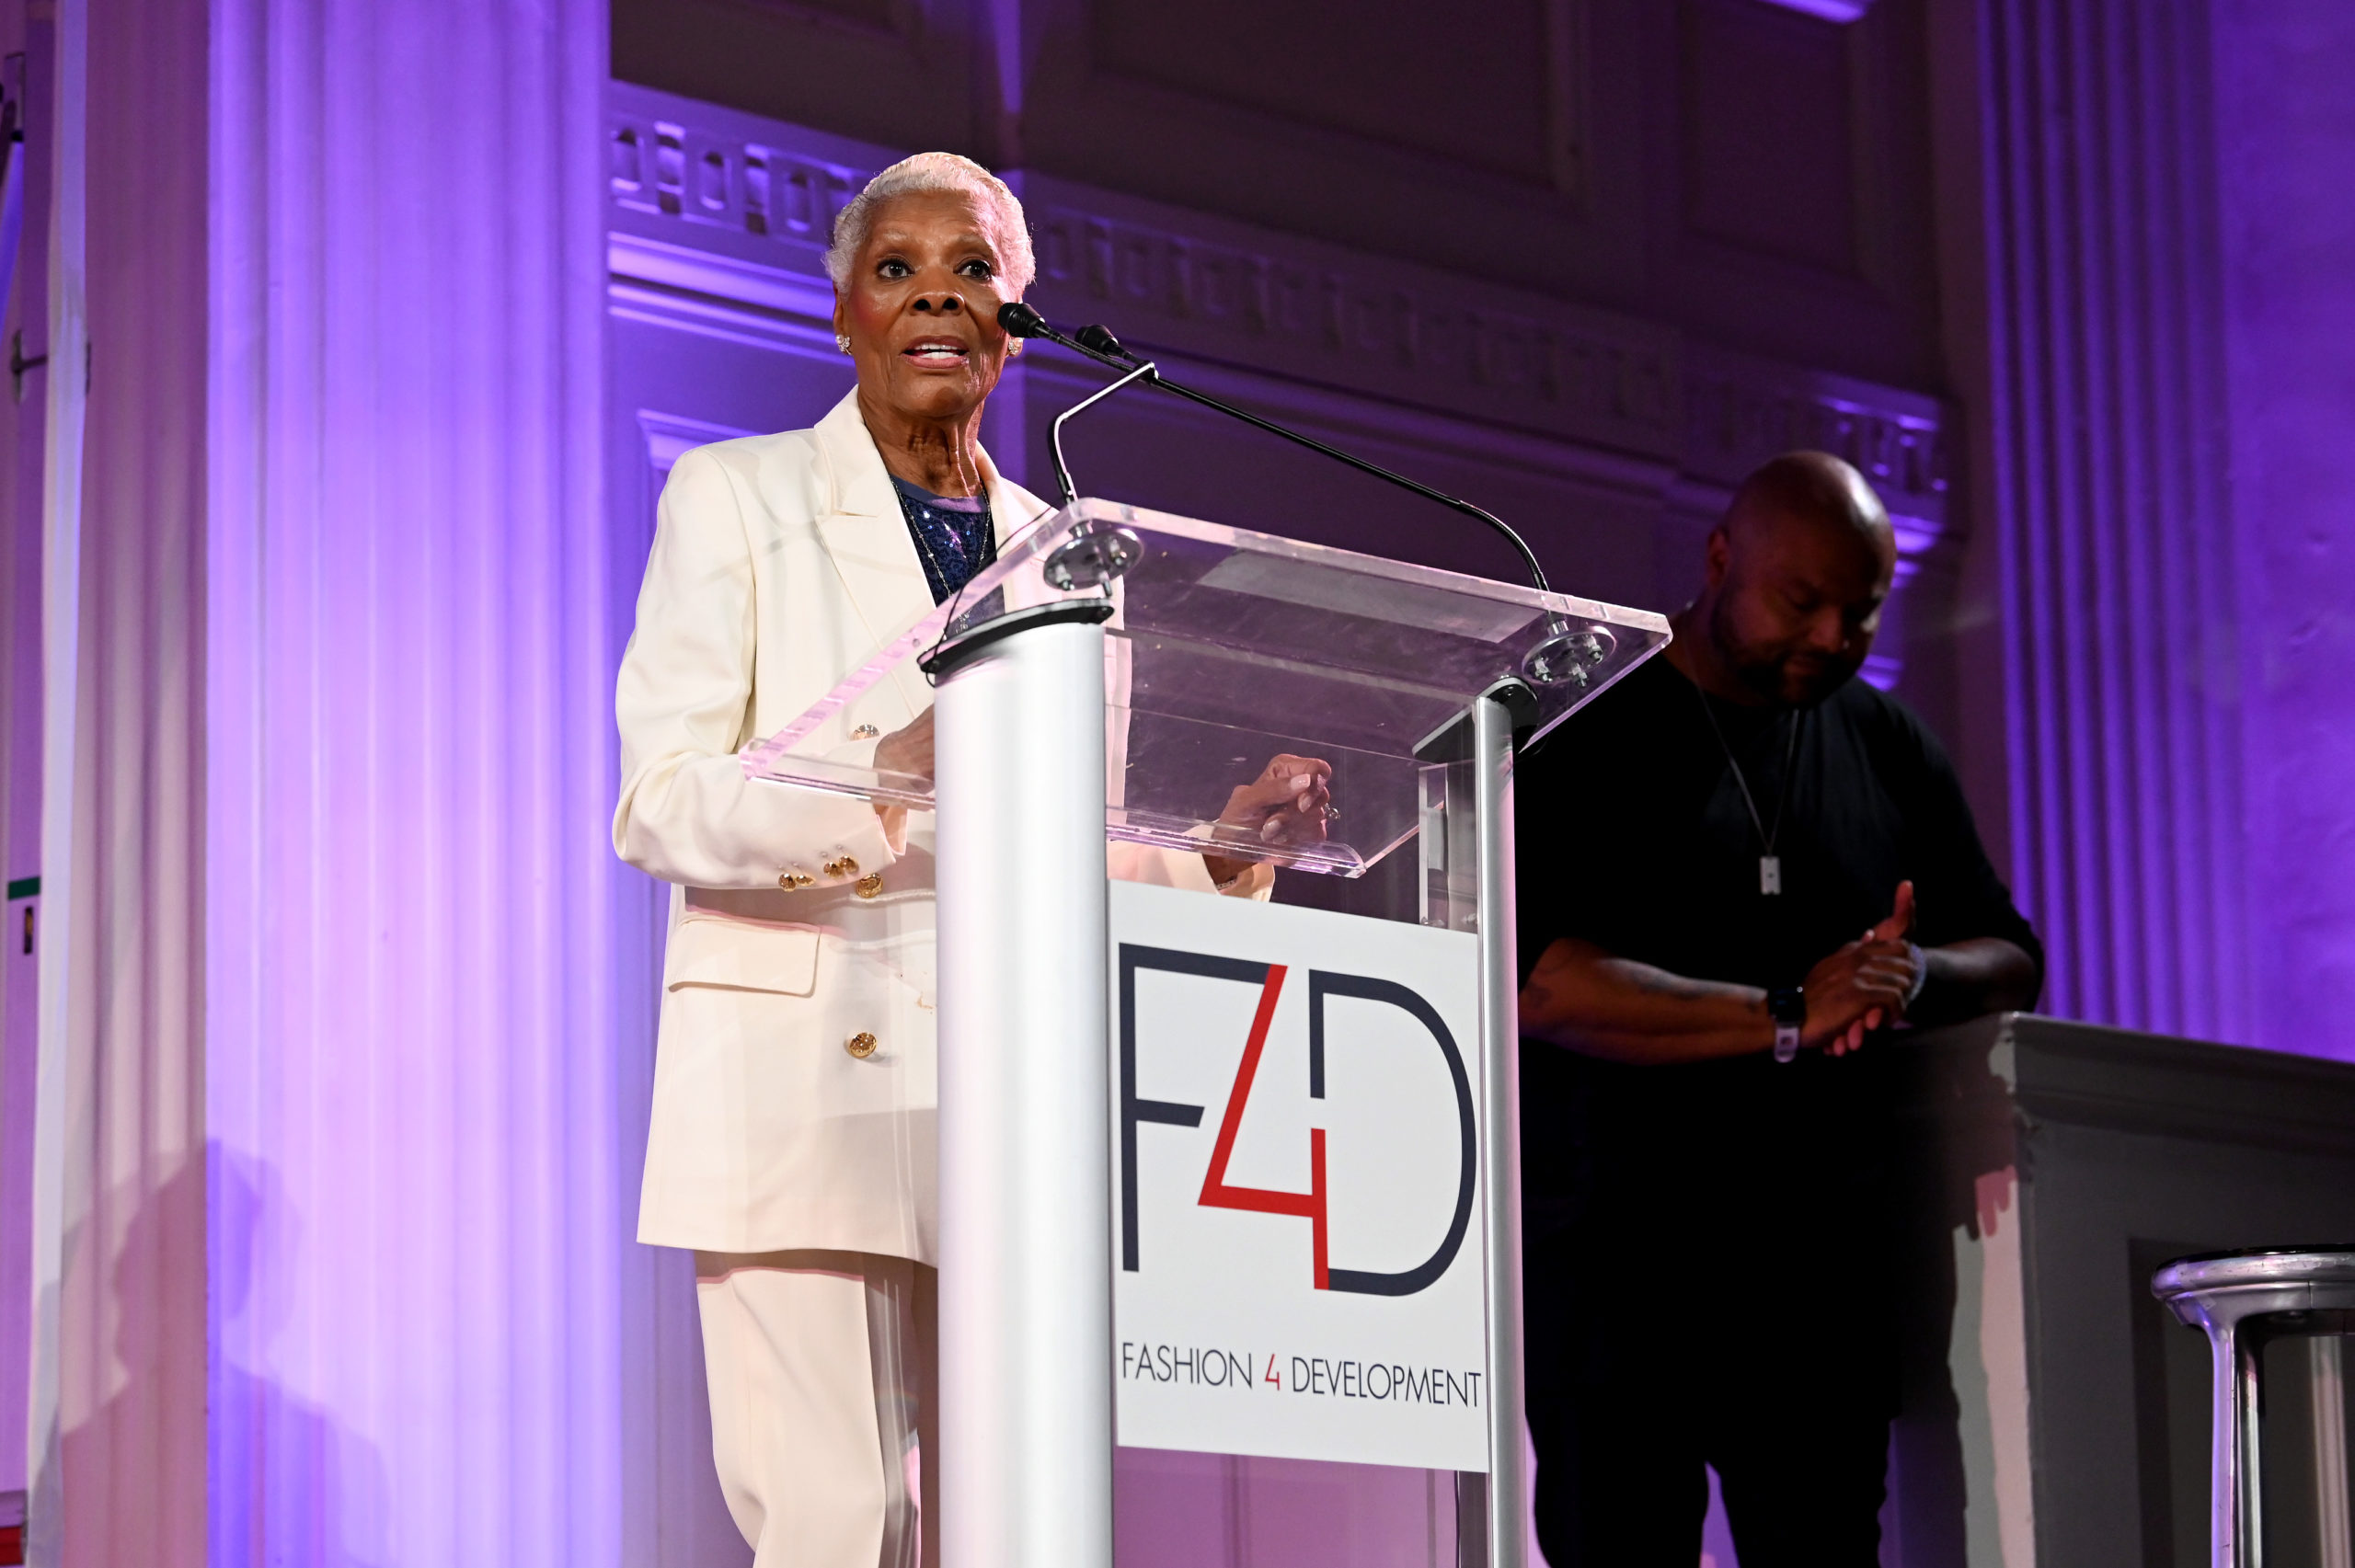  NEW YORK, NEW YORK - SEPTEMBER 19: Dionne Warwick performs on stage at The F4D 2nd Annual Sustainable Goals Banquet on September 19, 2022 in New York City. (Photo by Slaven Vlasic/Getty Images for Fashion 4 Development)